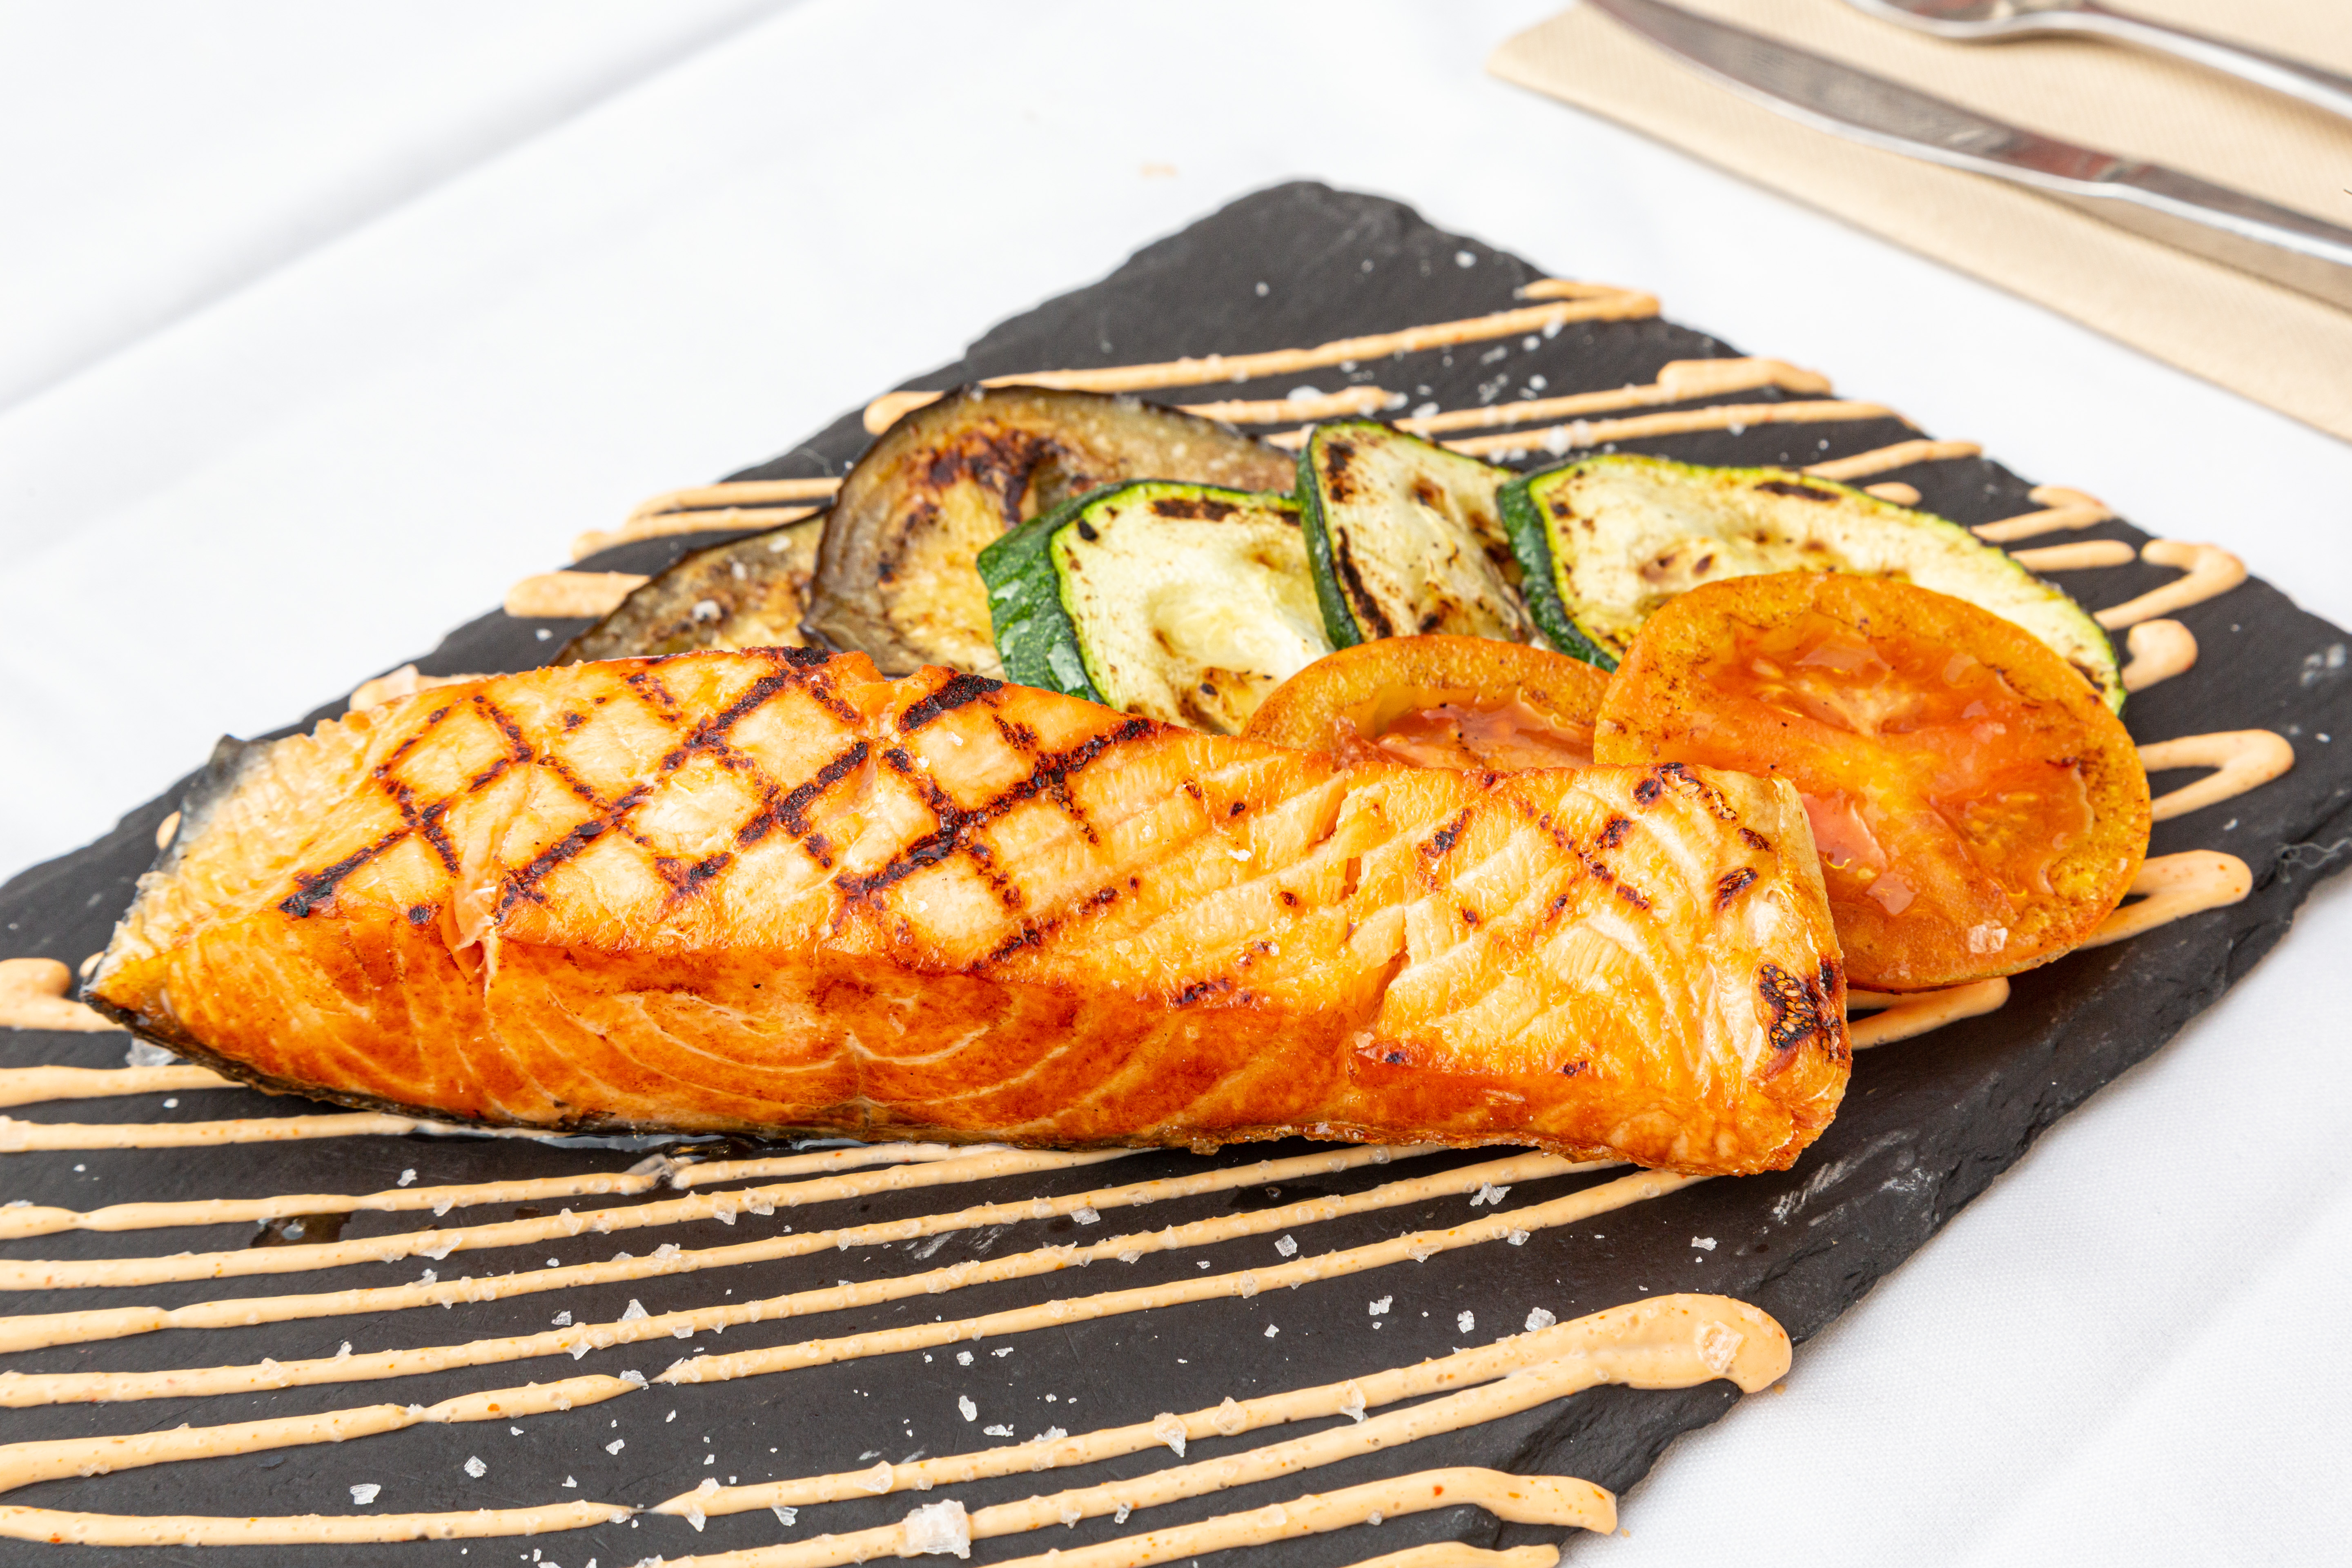 Grilled Norwegian salmon with seasonal vegetables with a touch of siracha.